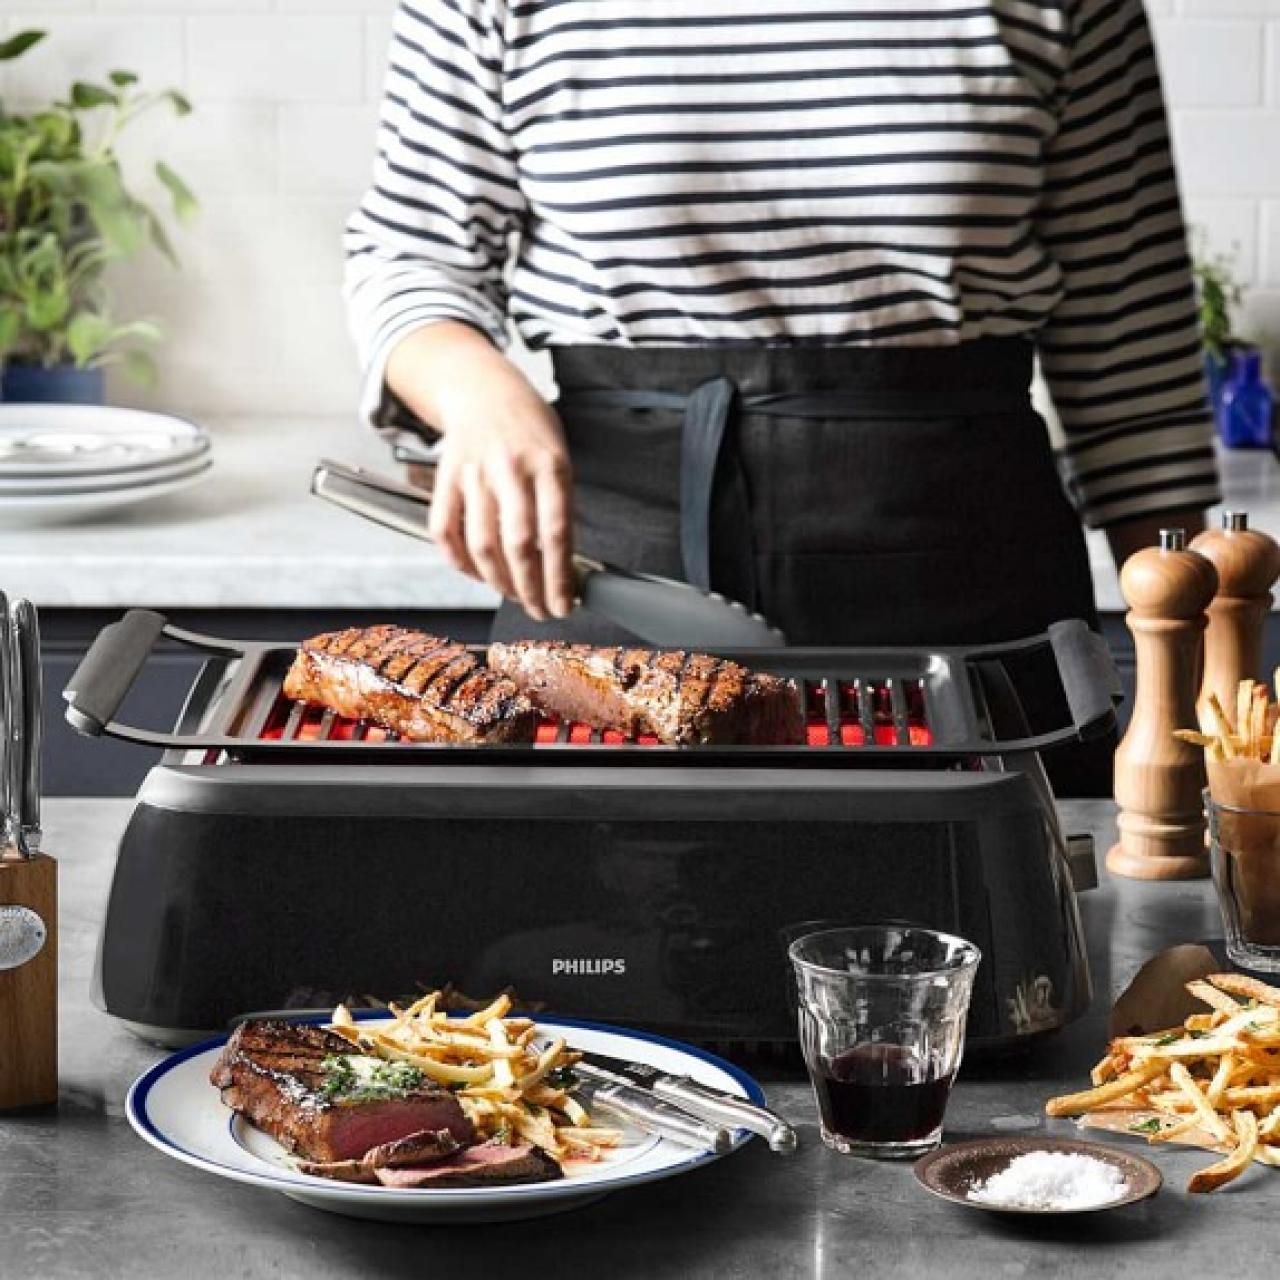 https://food.fnr.sndimg.com/content/dam/images/food/products/2019/5/23/rx_philips-smoke-less-infrared-grill-with-bbq-ampamp-steel-wire-grids.jpeg.rend.hgtvcom.1280.1280.suffix/1558627287509.jpeg